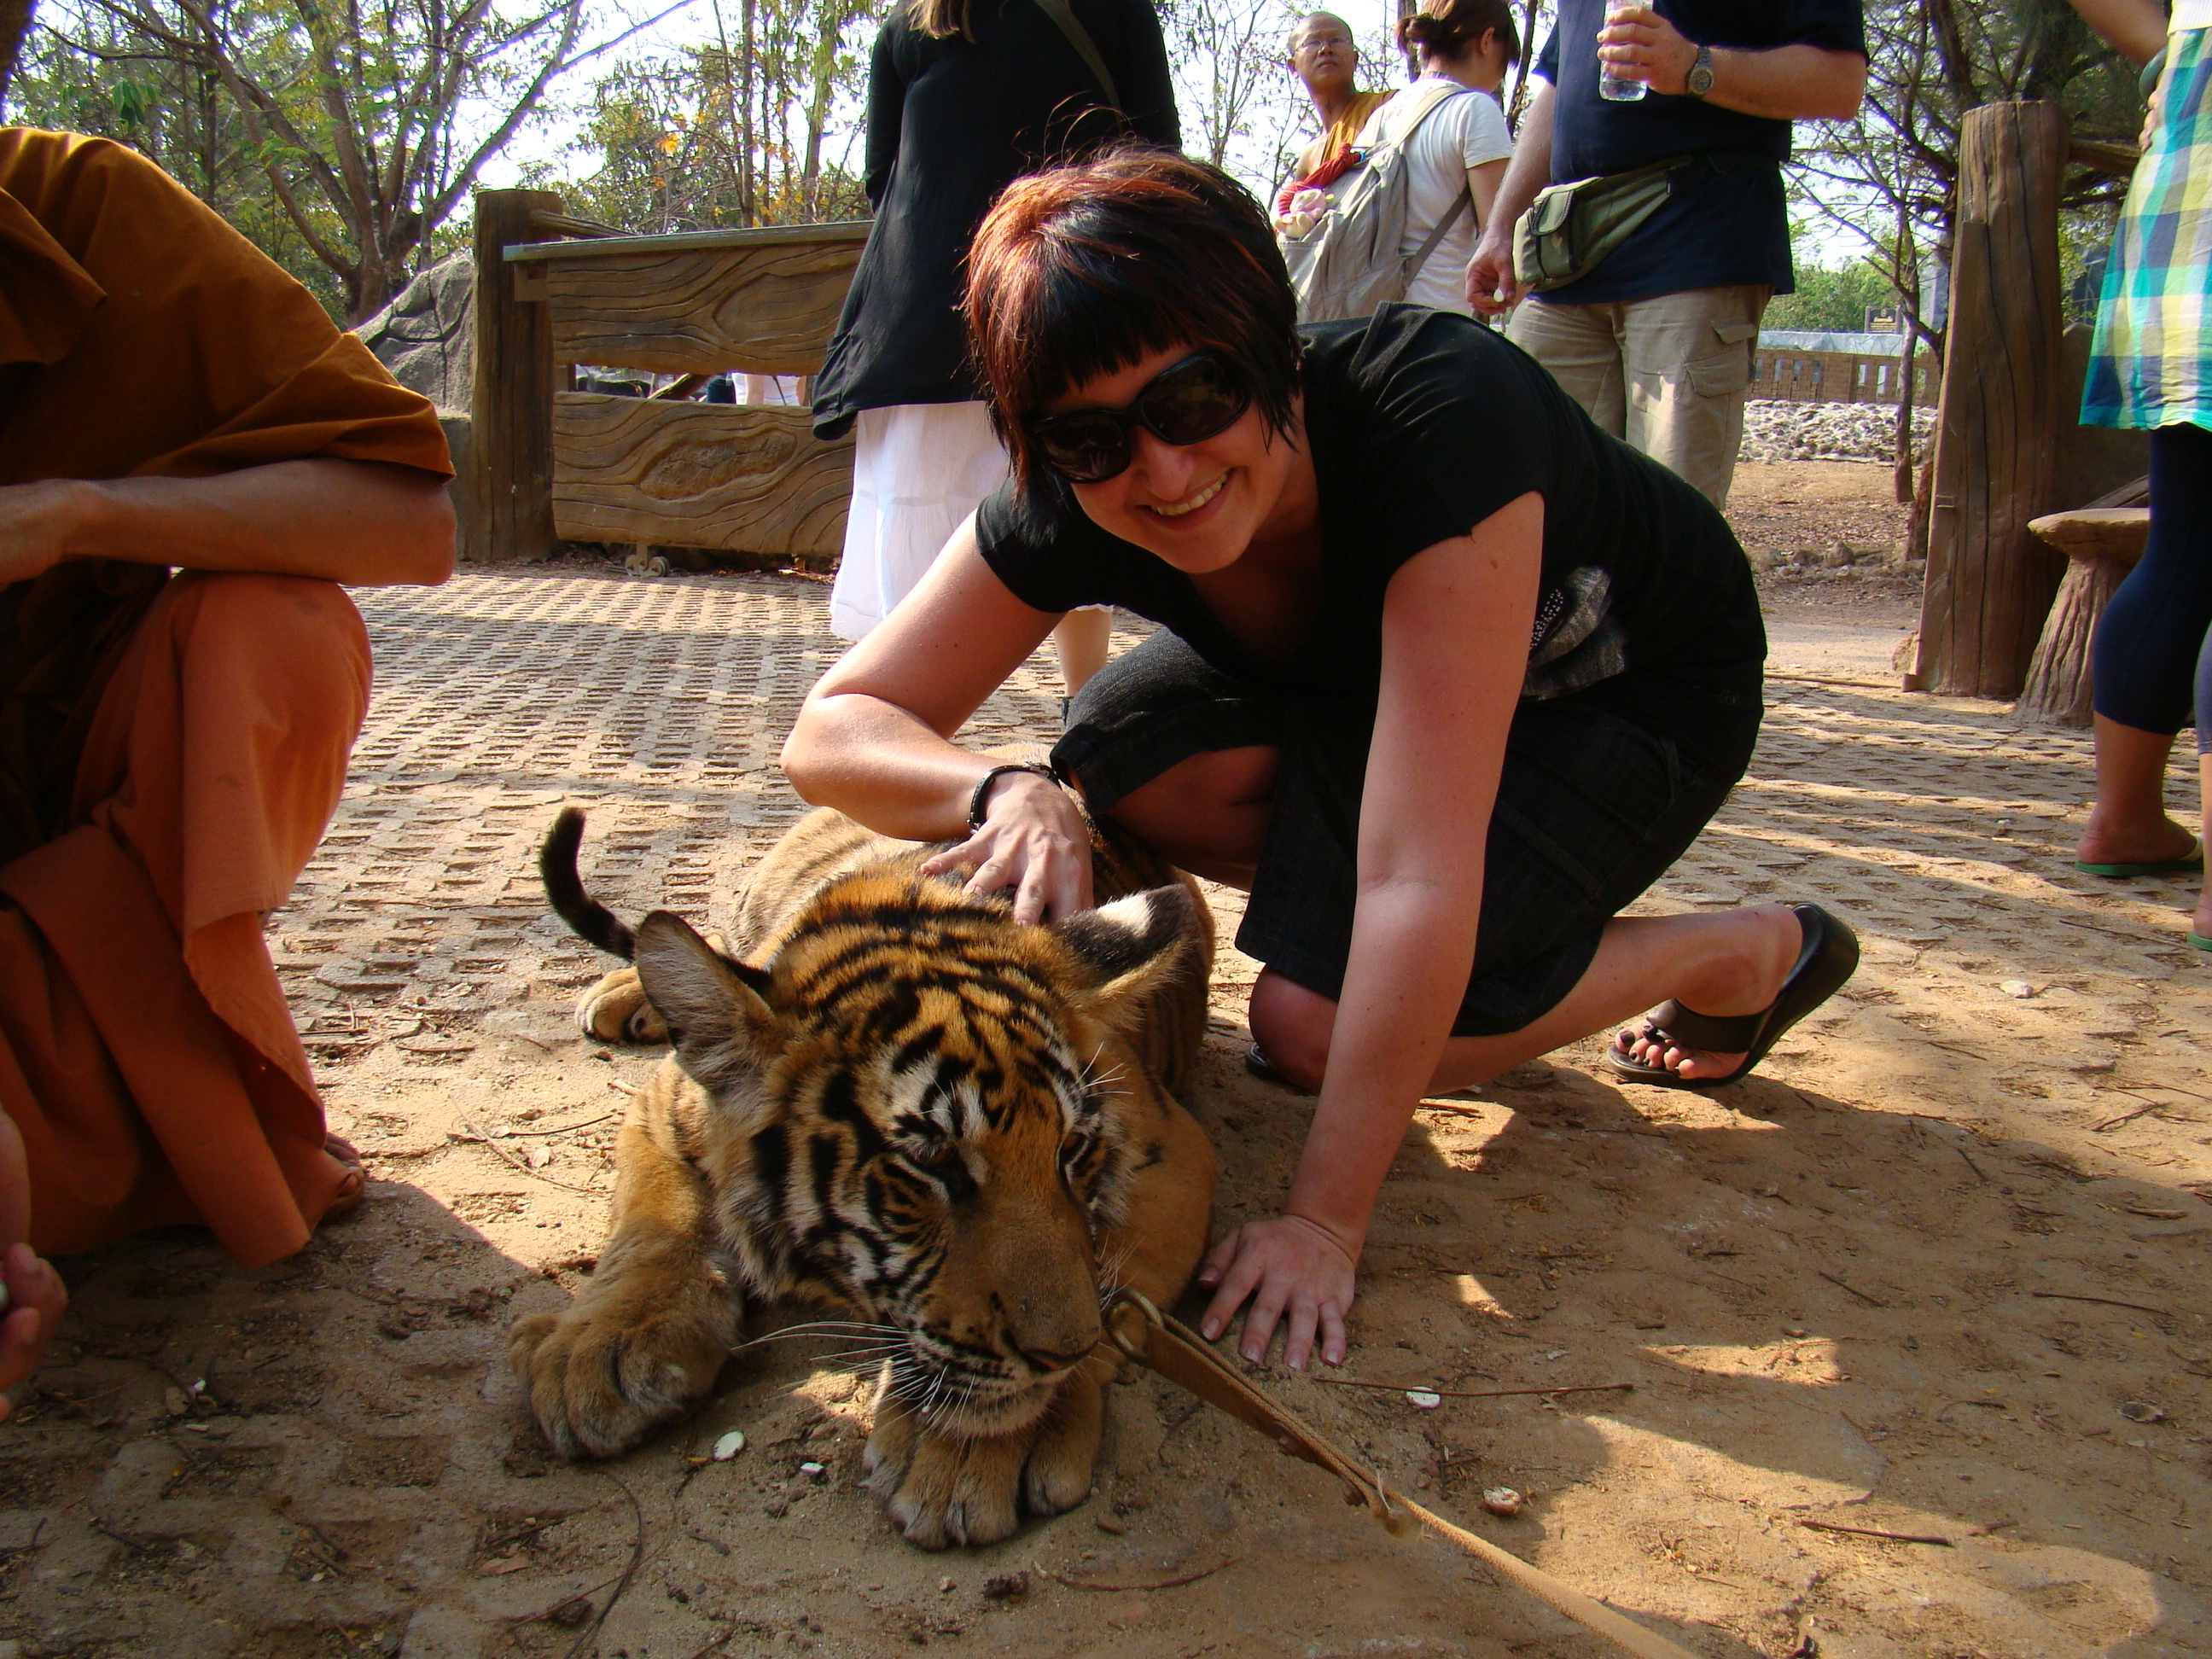 Me and tigers in Thailand